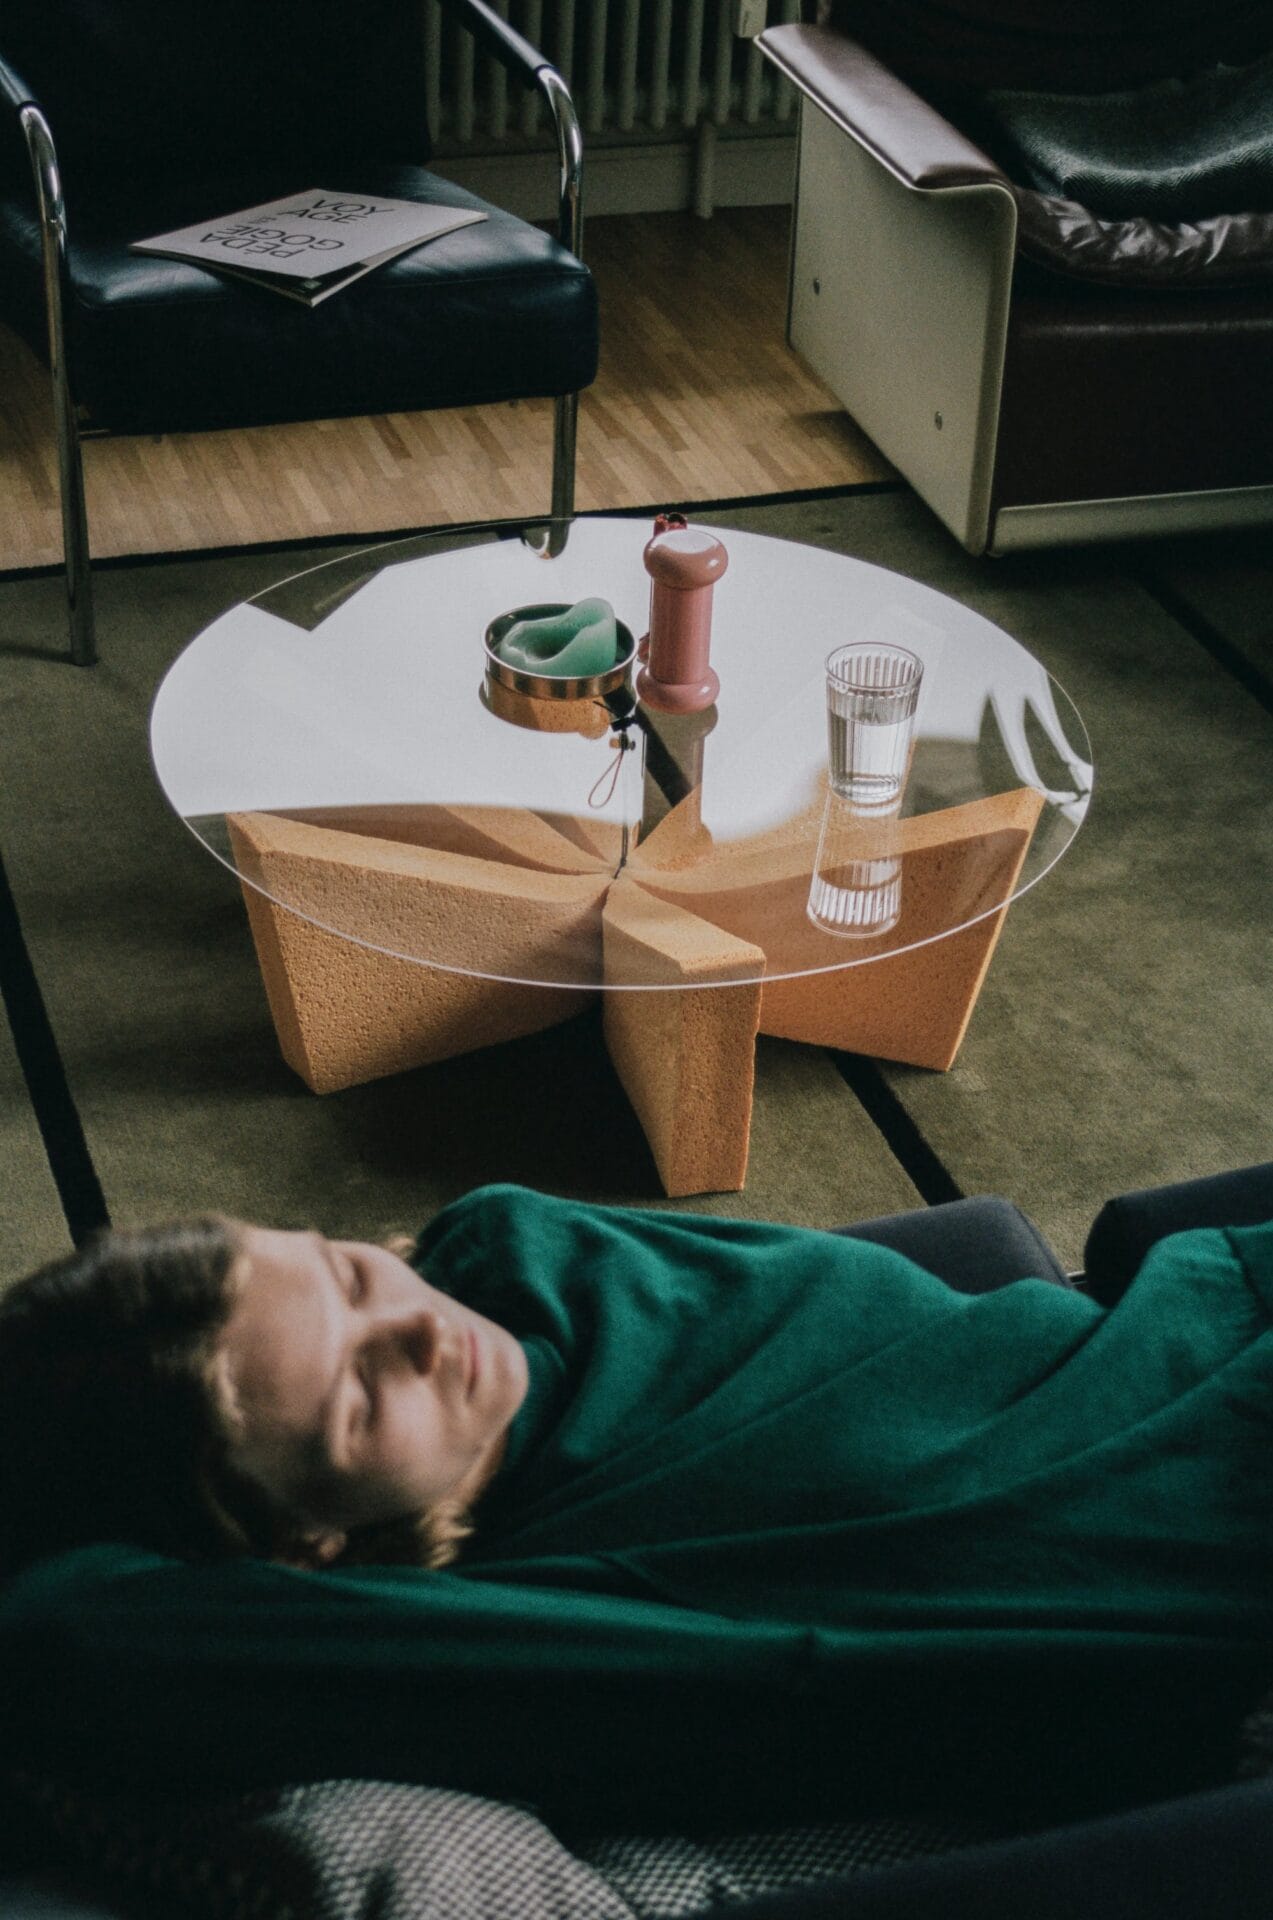 an acrylic top with a glass of water and other objects sits atop a sponge base while a person sleeps on a couch nearby